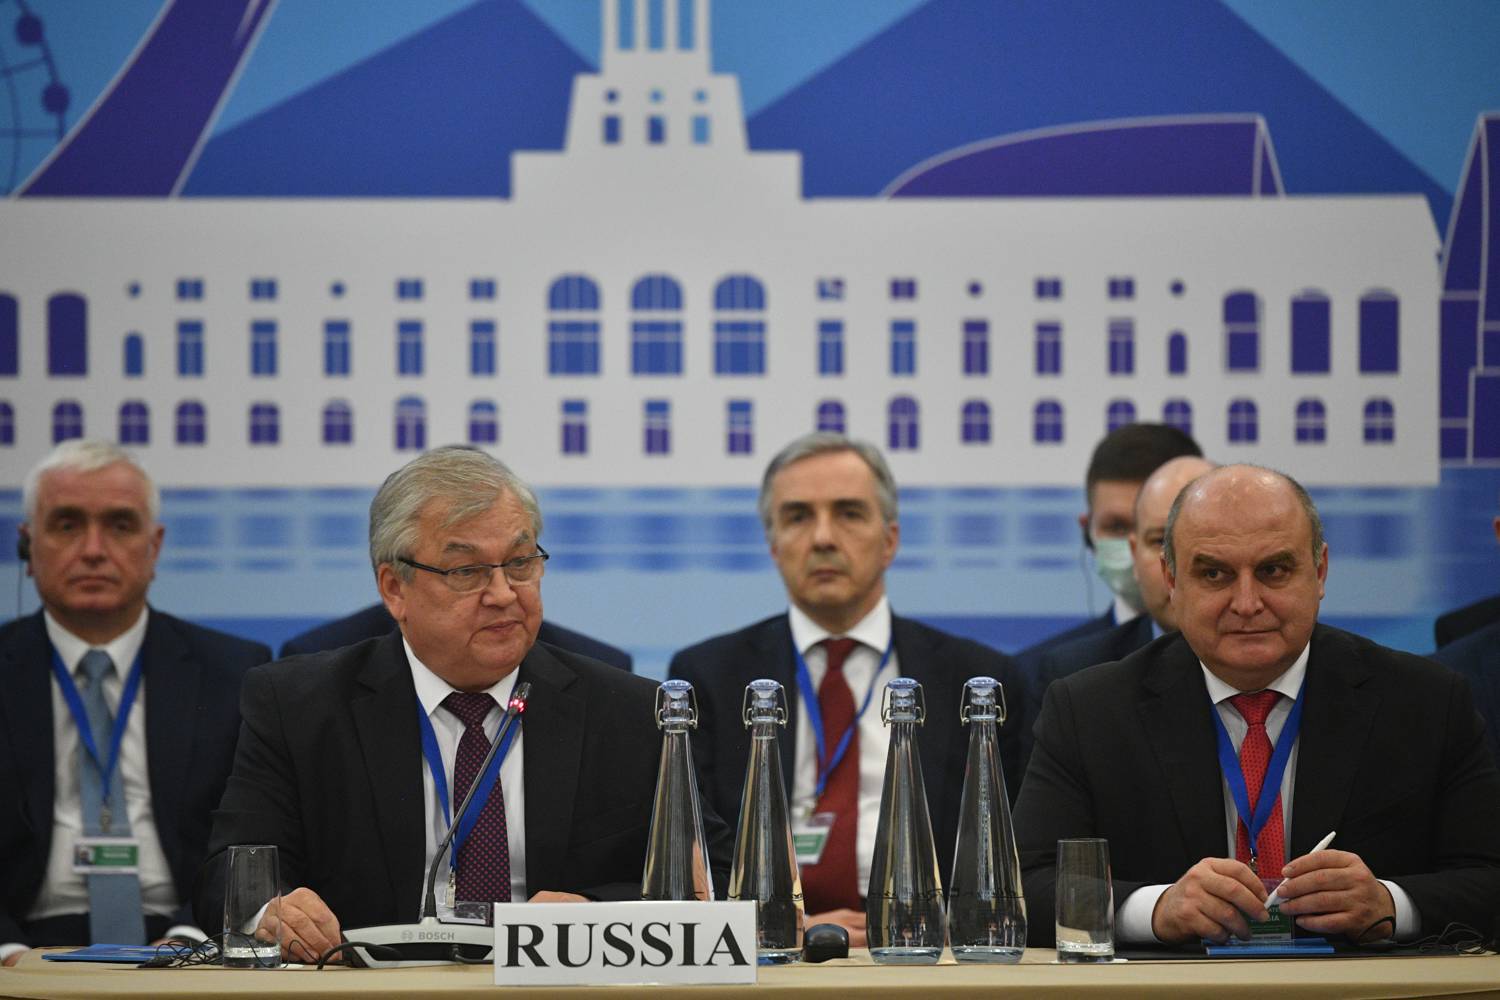 Russian delegation to the Astana process at the 15th Meeting of Guarantors on Syria. Photo: Anadolu Agency / Getty images